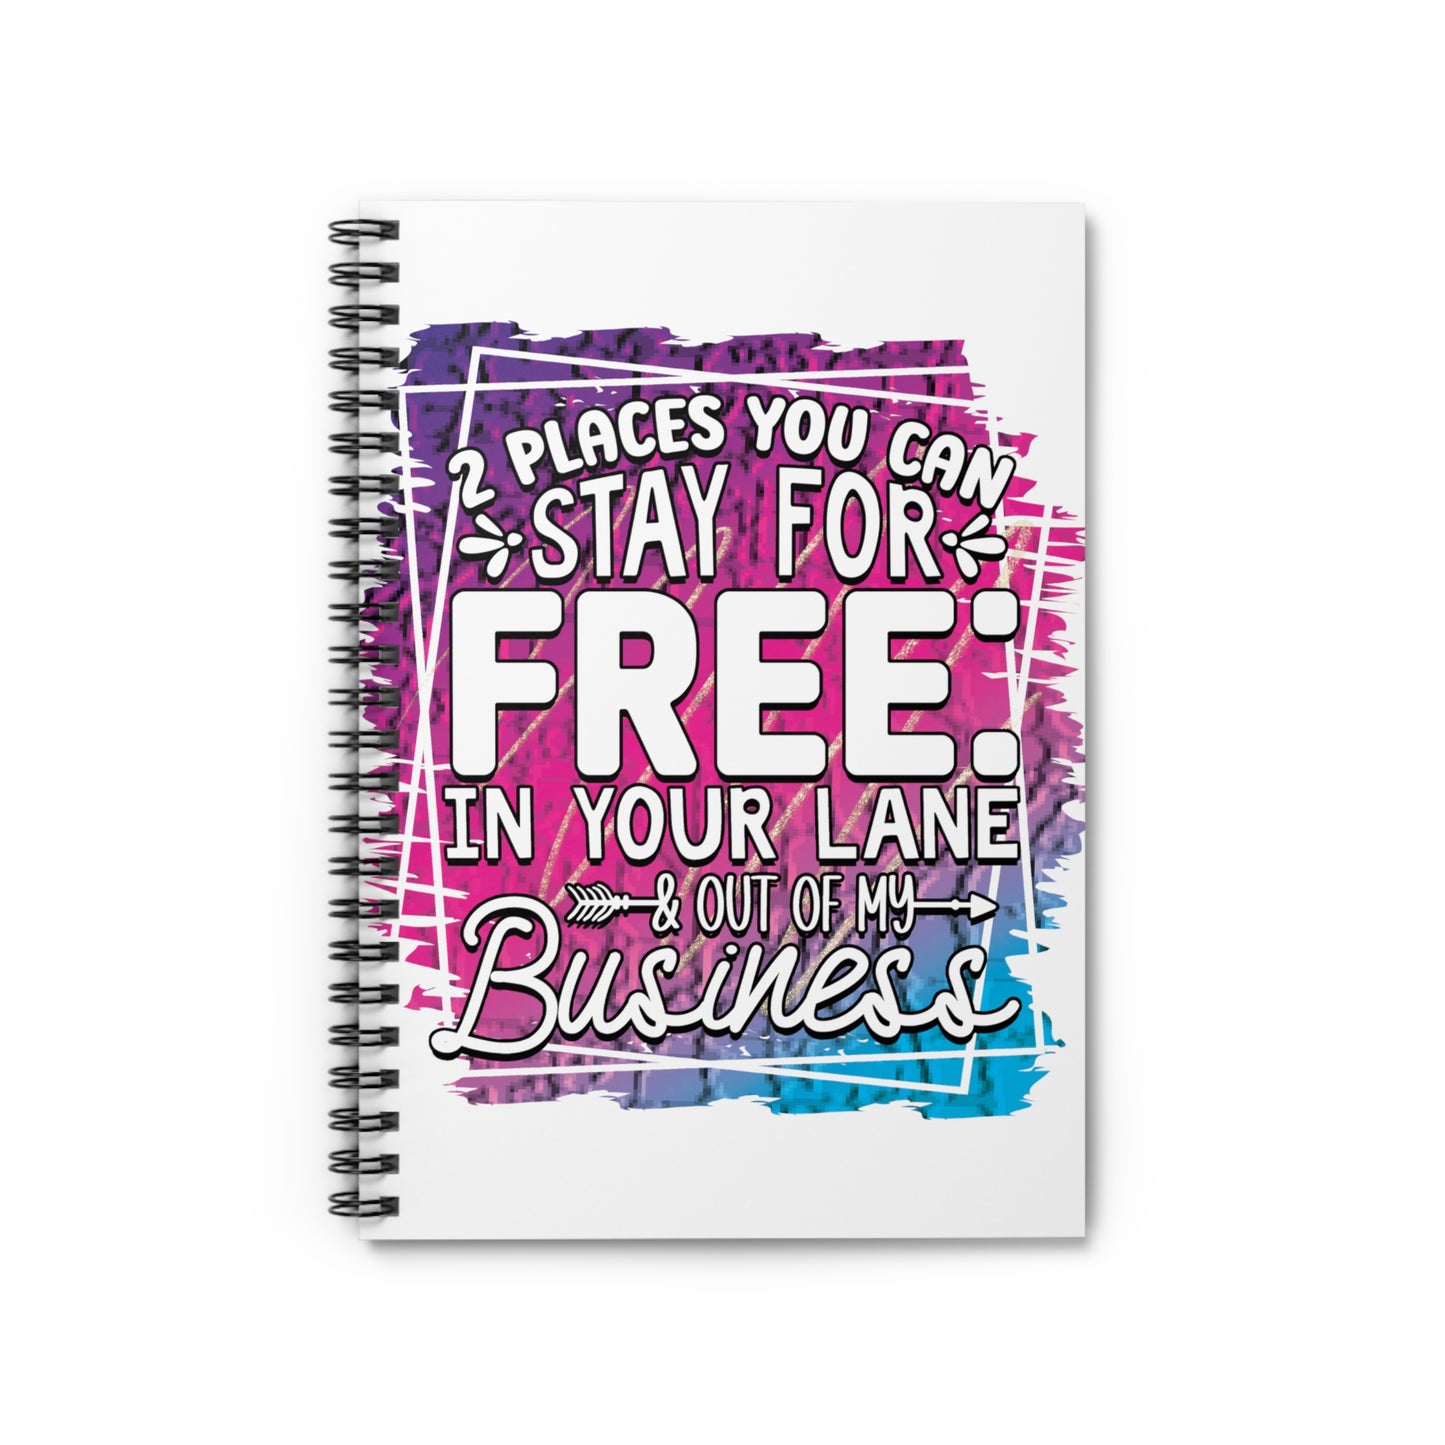 Stay for Free: Spiral Notebook - Log Books - Journals - Diaries - and More Custom Printed by TheGlassyLass.com